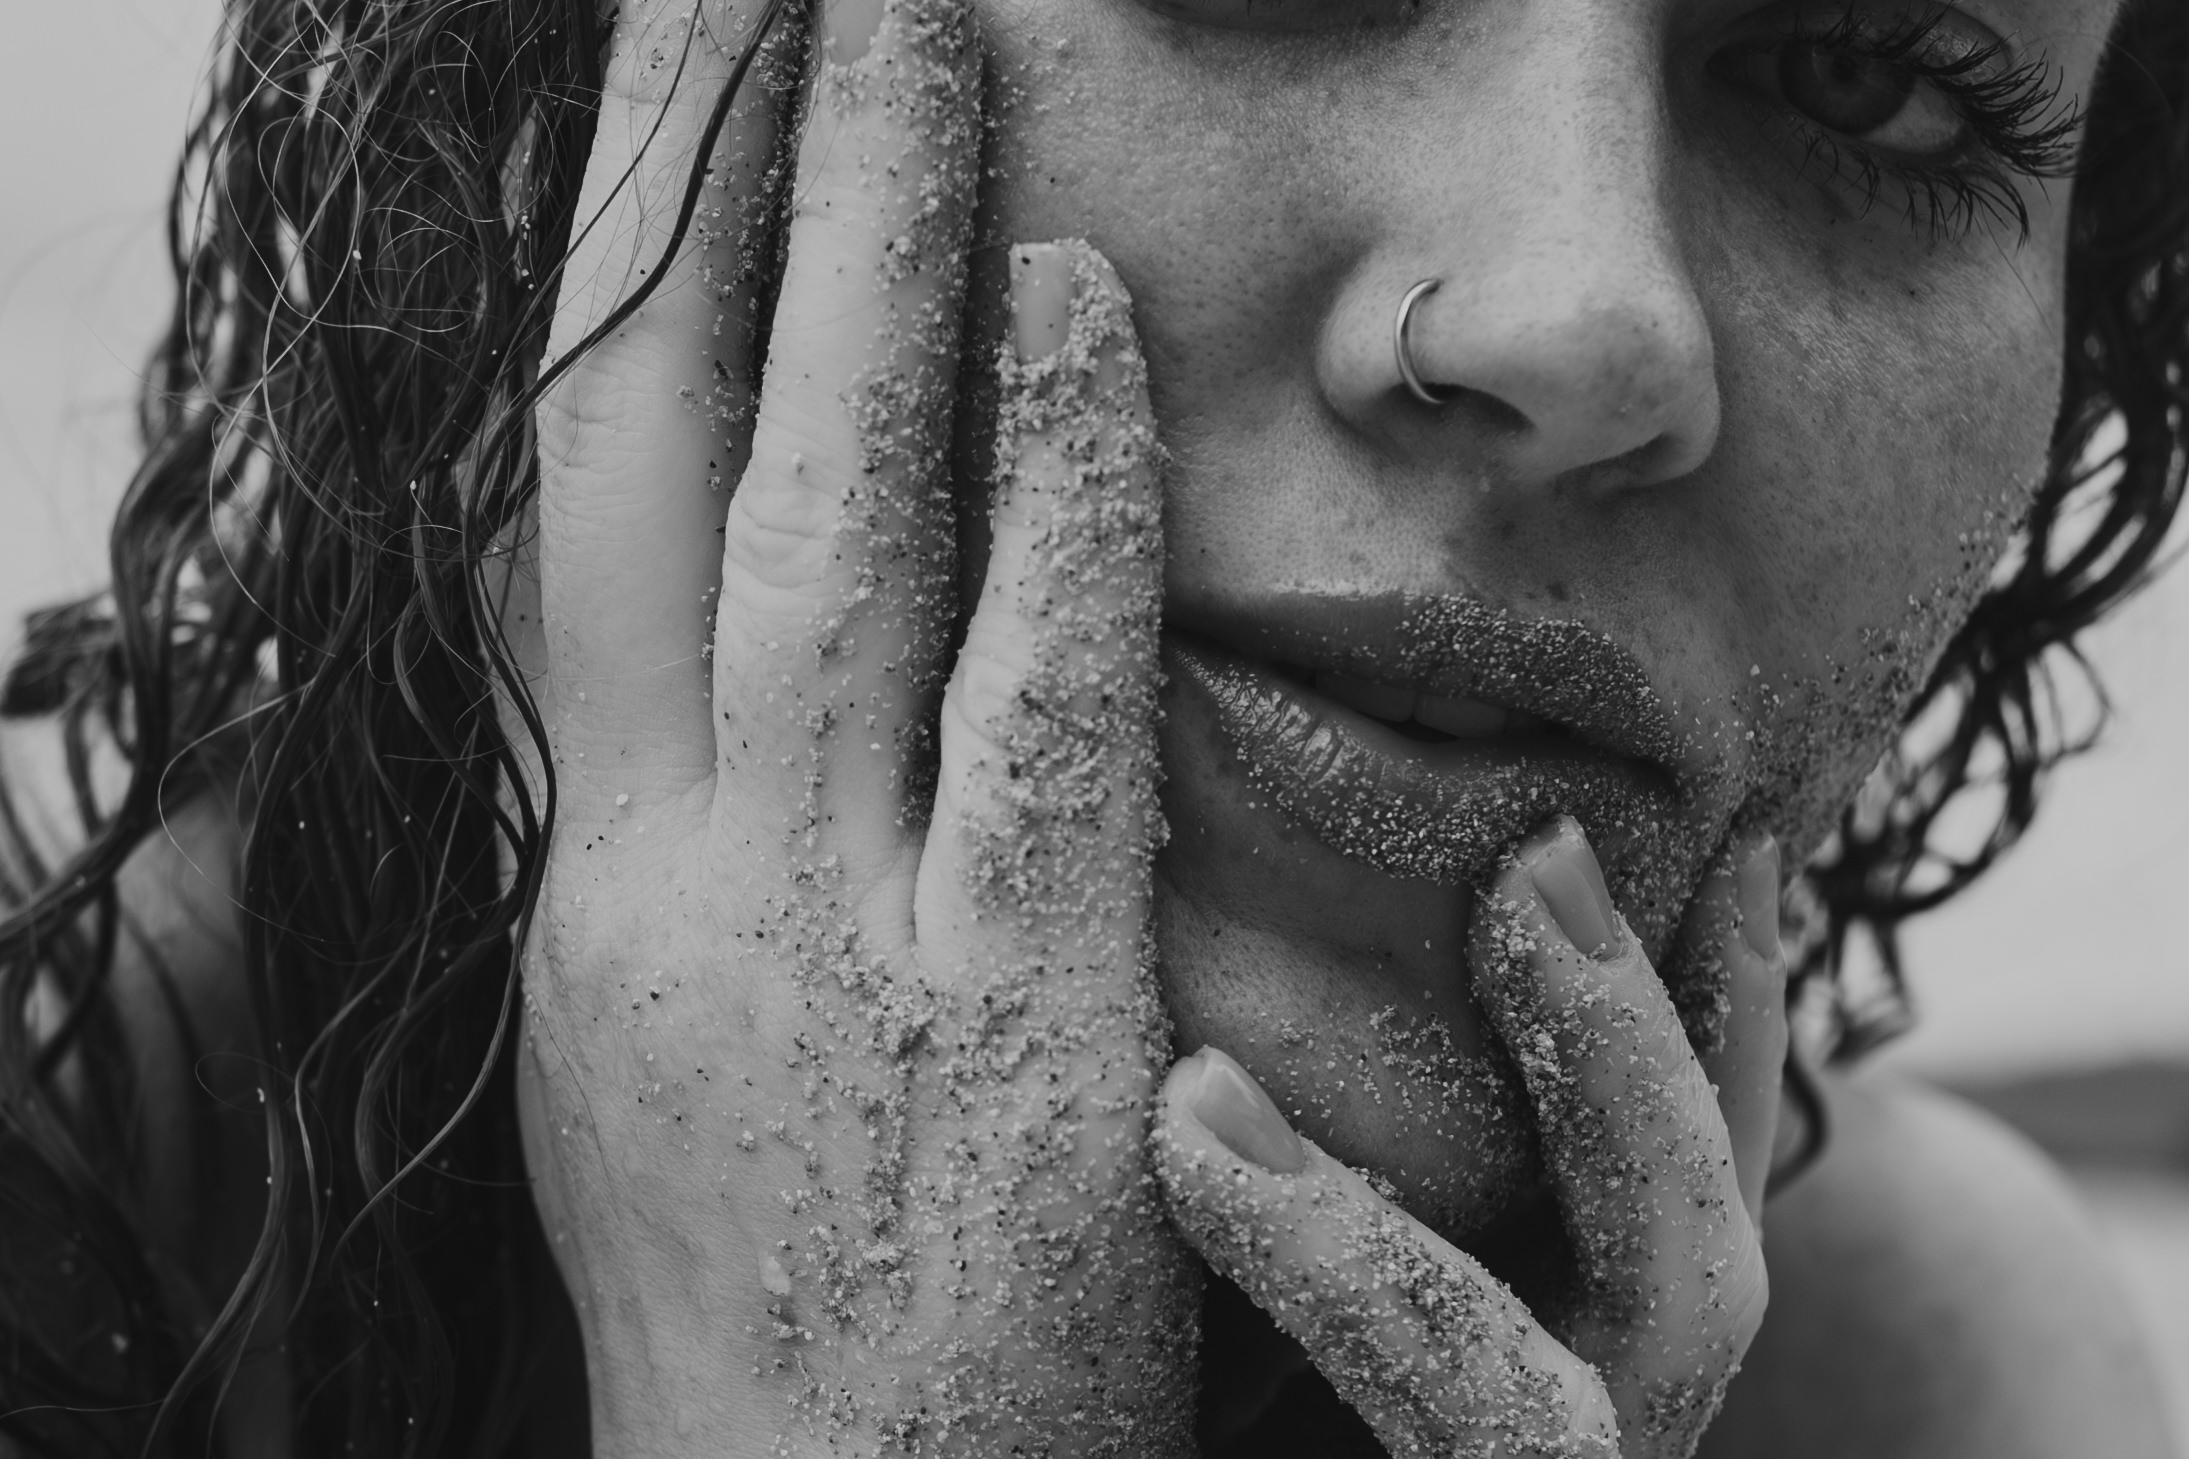 a closeup, black and white photo of a woman's lips and fingers covered in sand. boudoir photos rule.